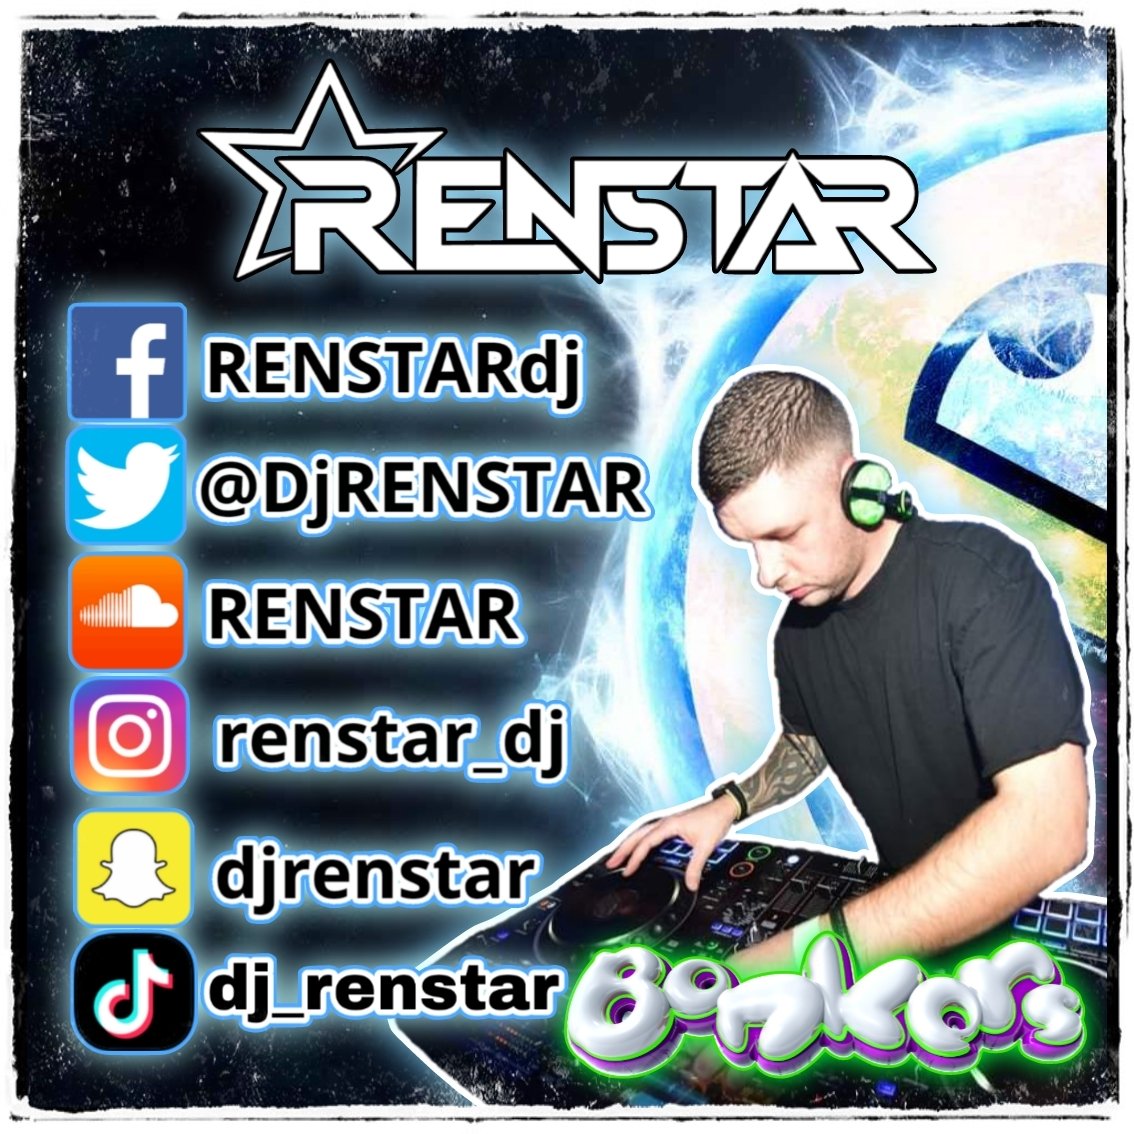 Hit Me Up For All Future Booking Enquiries 😎✌️
.
.
.
#Renstar #Bonkers #Future #Booking #Music #HardDance #HappyHardcore #Dj #Producer #Artist #Bookings #Follow #NeverGiveUp